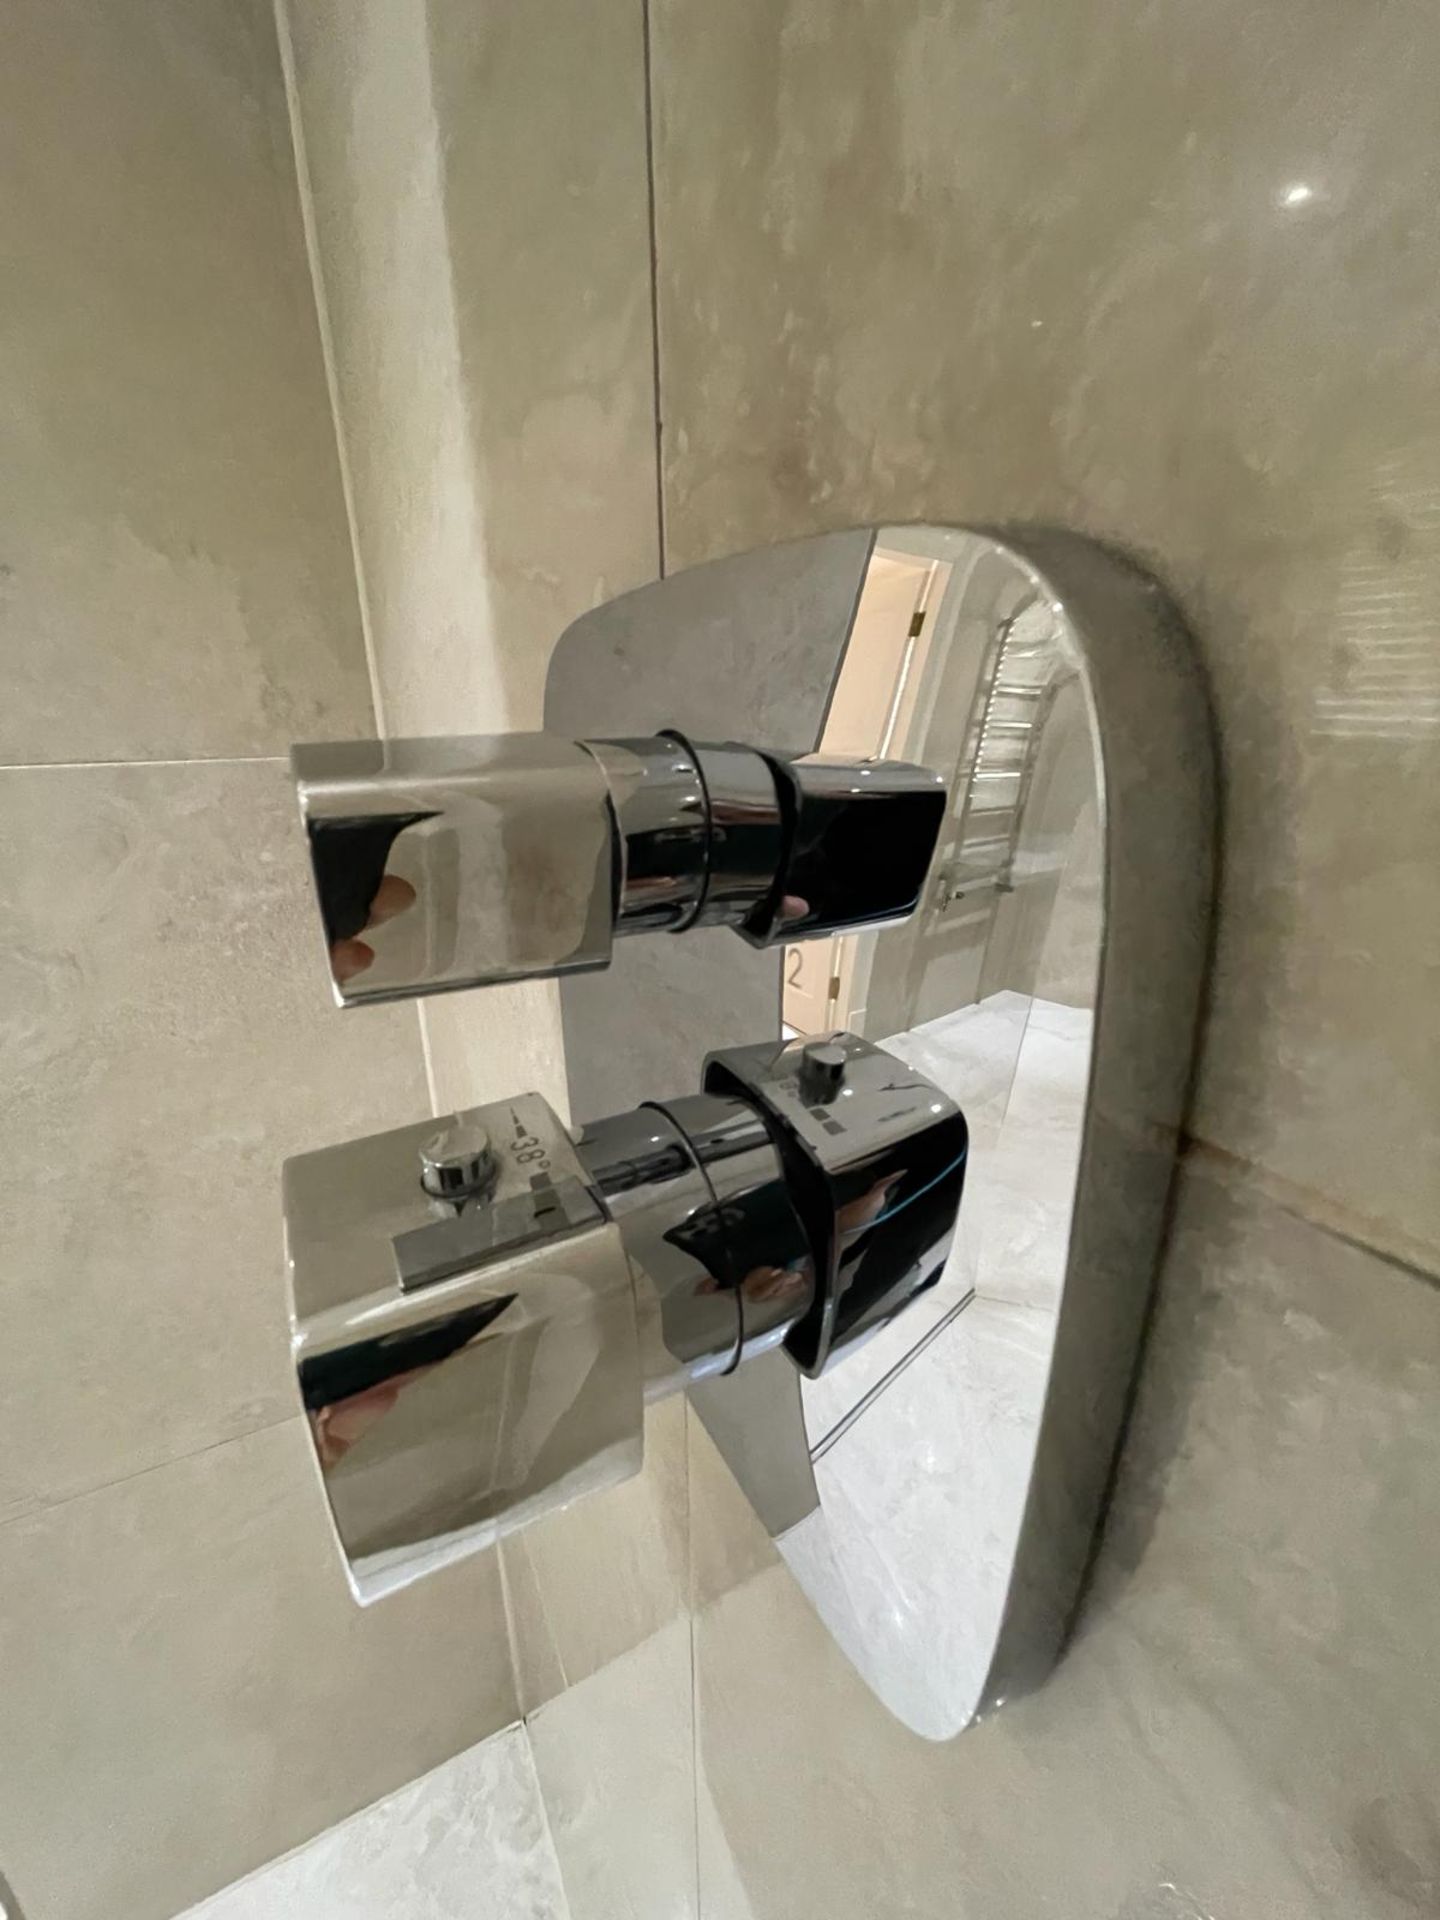 1 x Premium Shower and Enclosure + hansgrohe Controls and Thermostat - Ref: PAN251 / Bed2bth - CL896 - Image 3 of 15